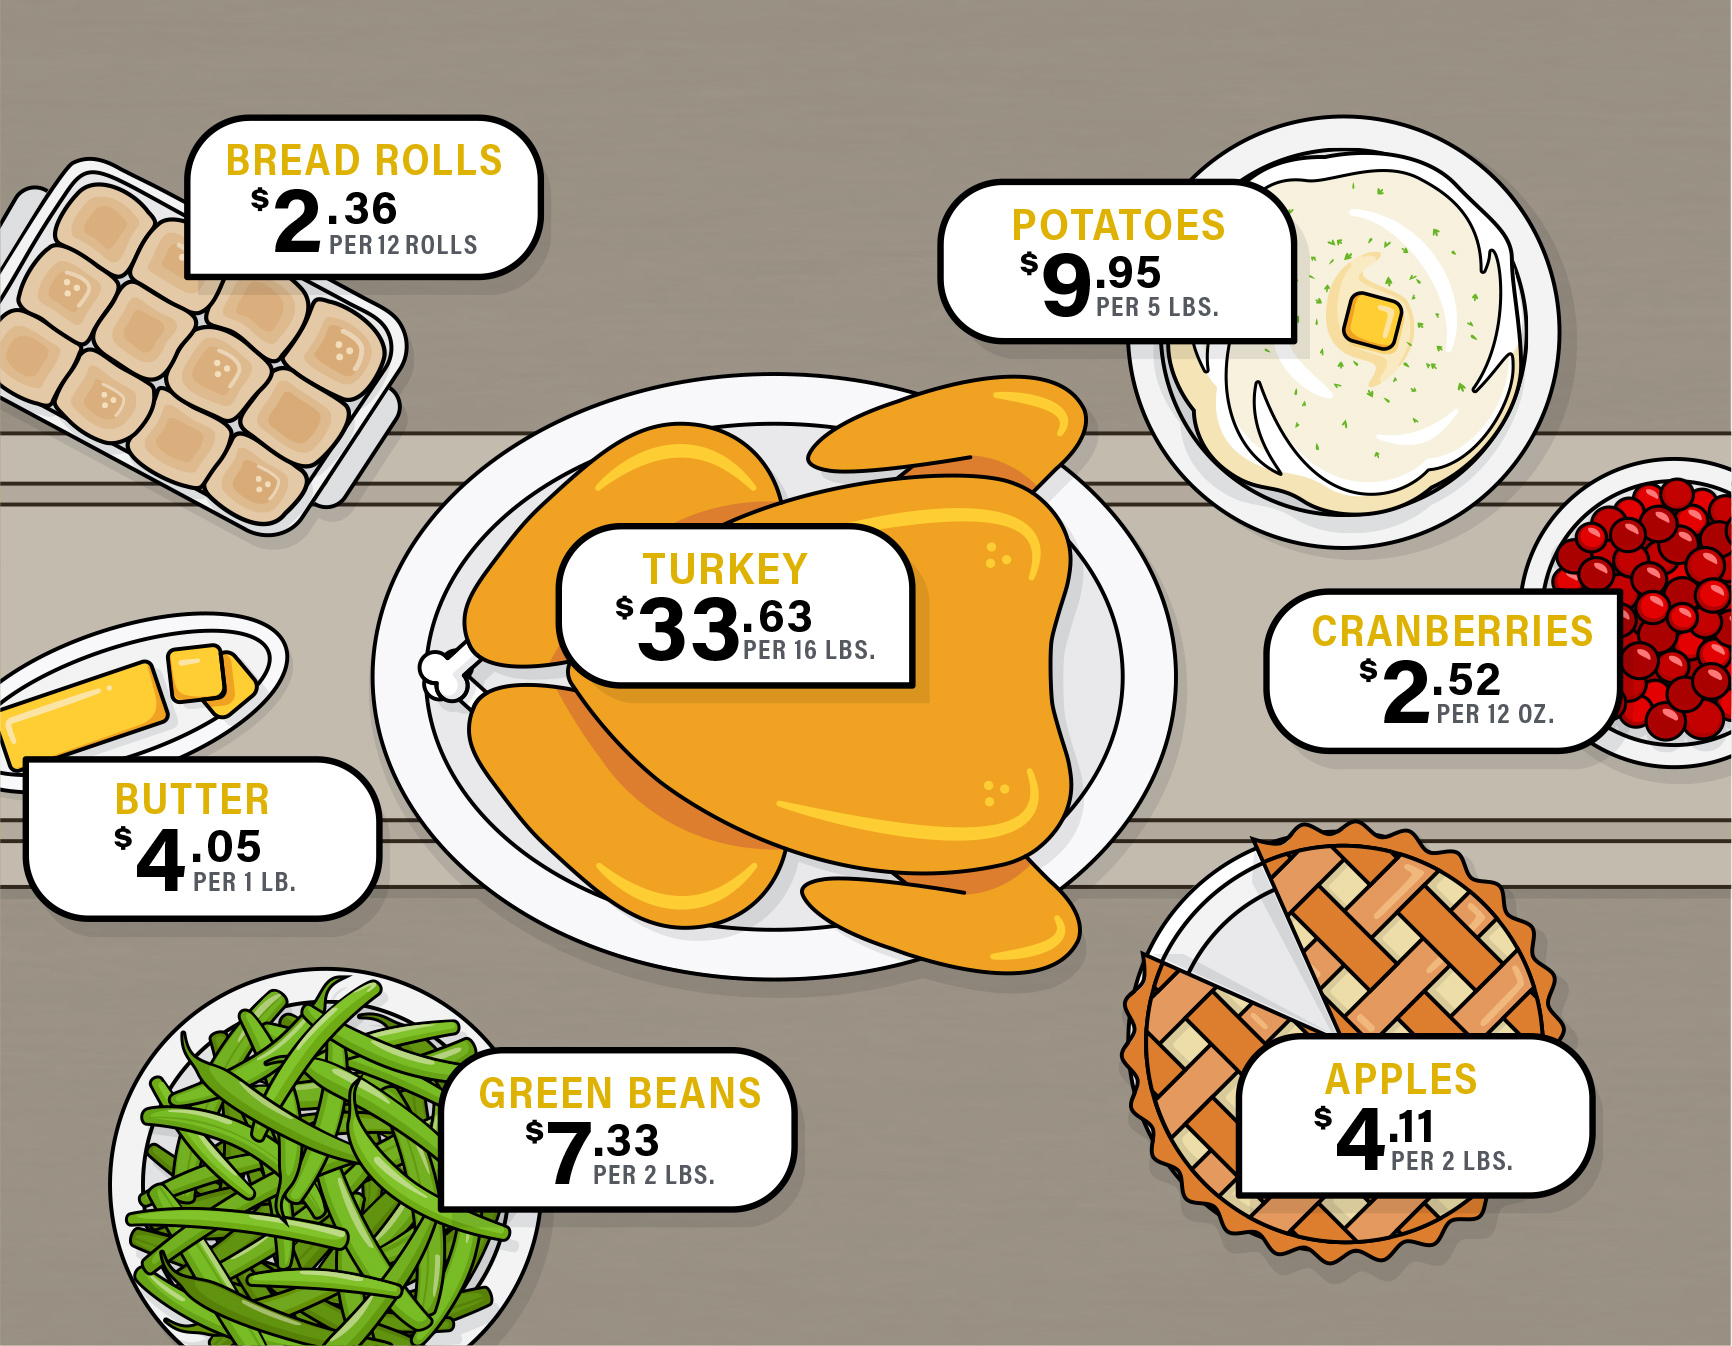 Figure 2. National average prices for a 16-lb. turkey, 5 lbs. potatoes, 2 lbs. green beans, 12 oz. cranberries, 2 lbs. apples, 12 dinner rolls, and 1 lb. butter. National average prices for the rest of the meal’s ingredients can be found on the Thanksgiving meal dashboard.